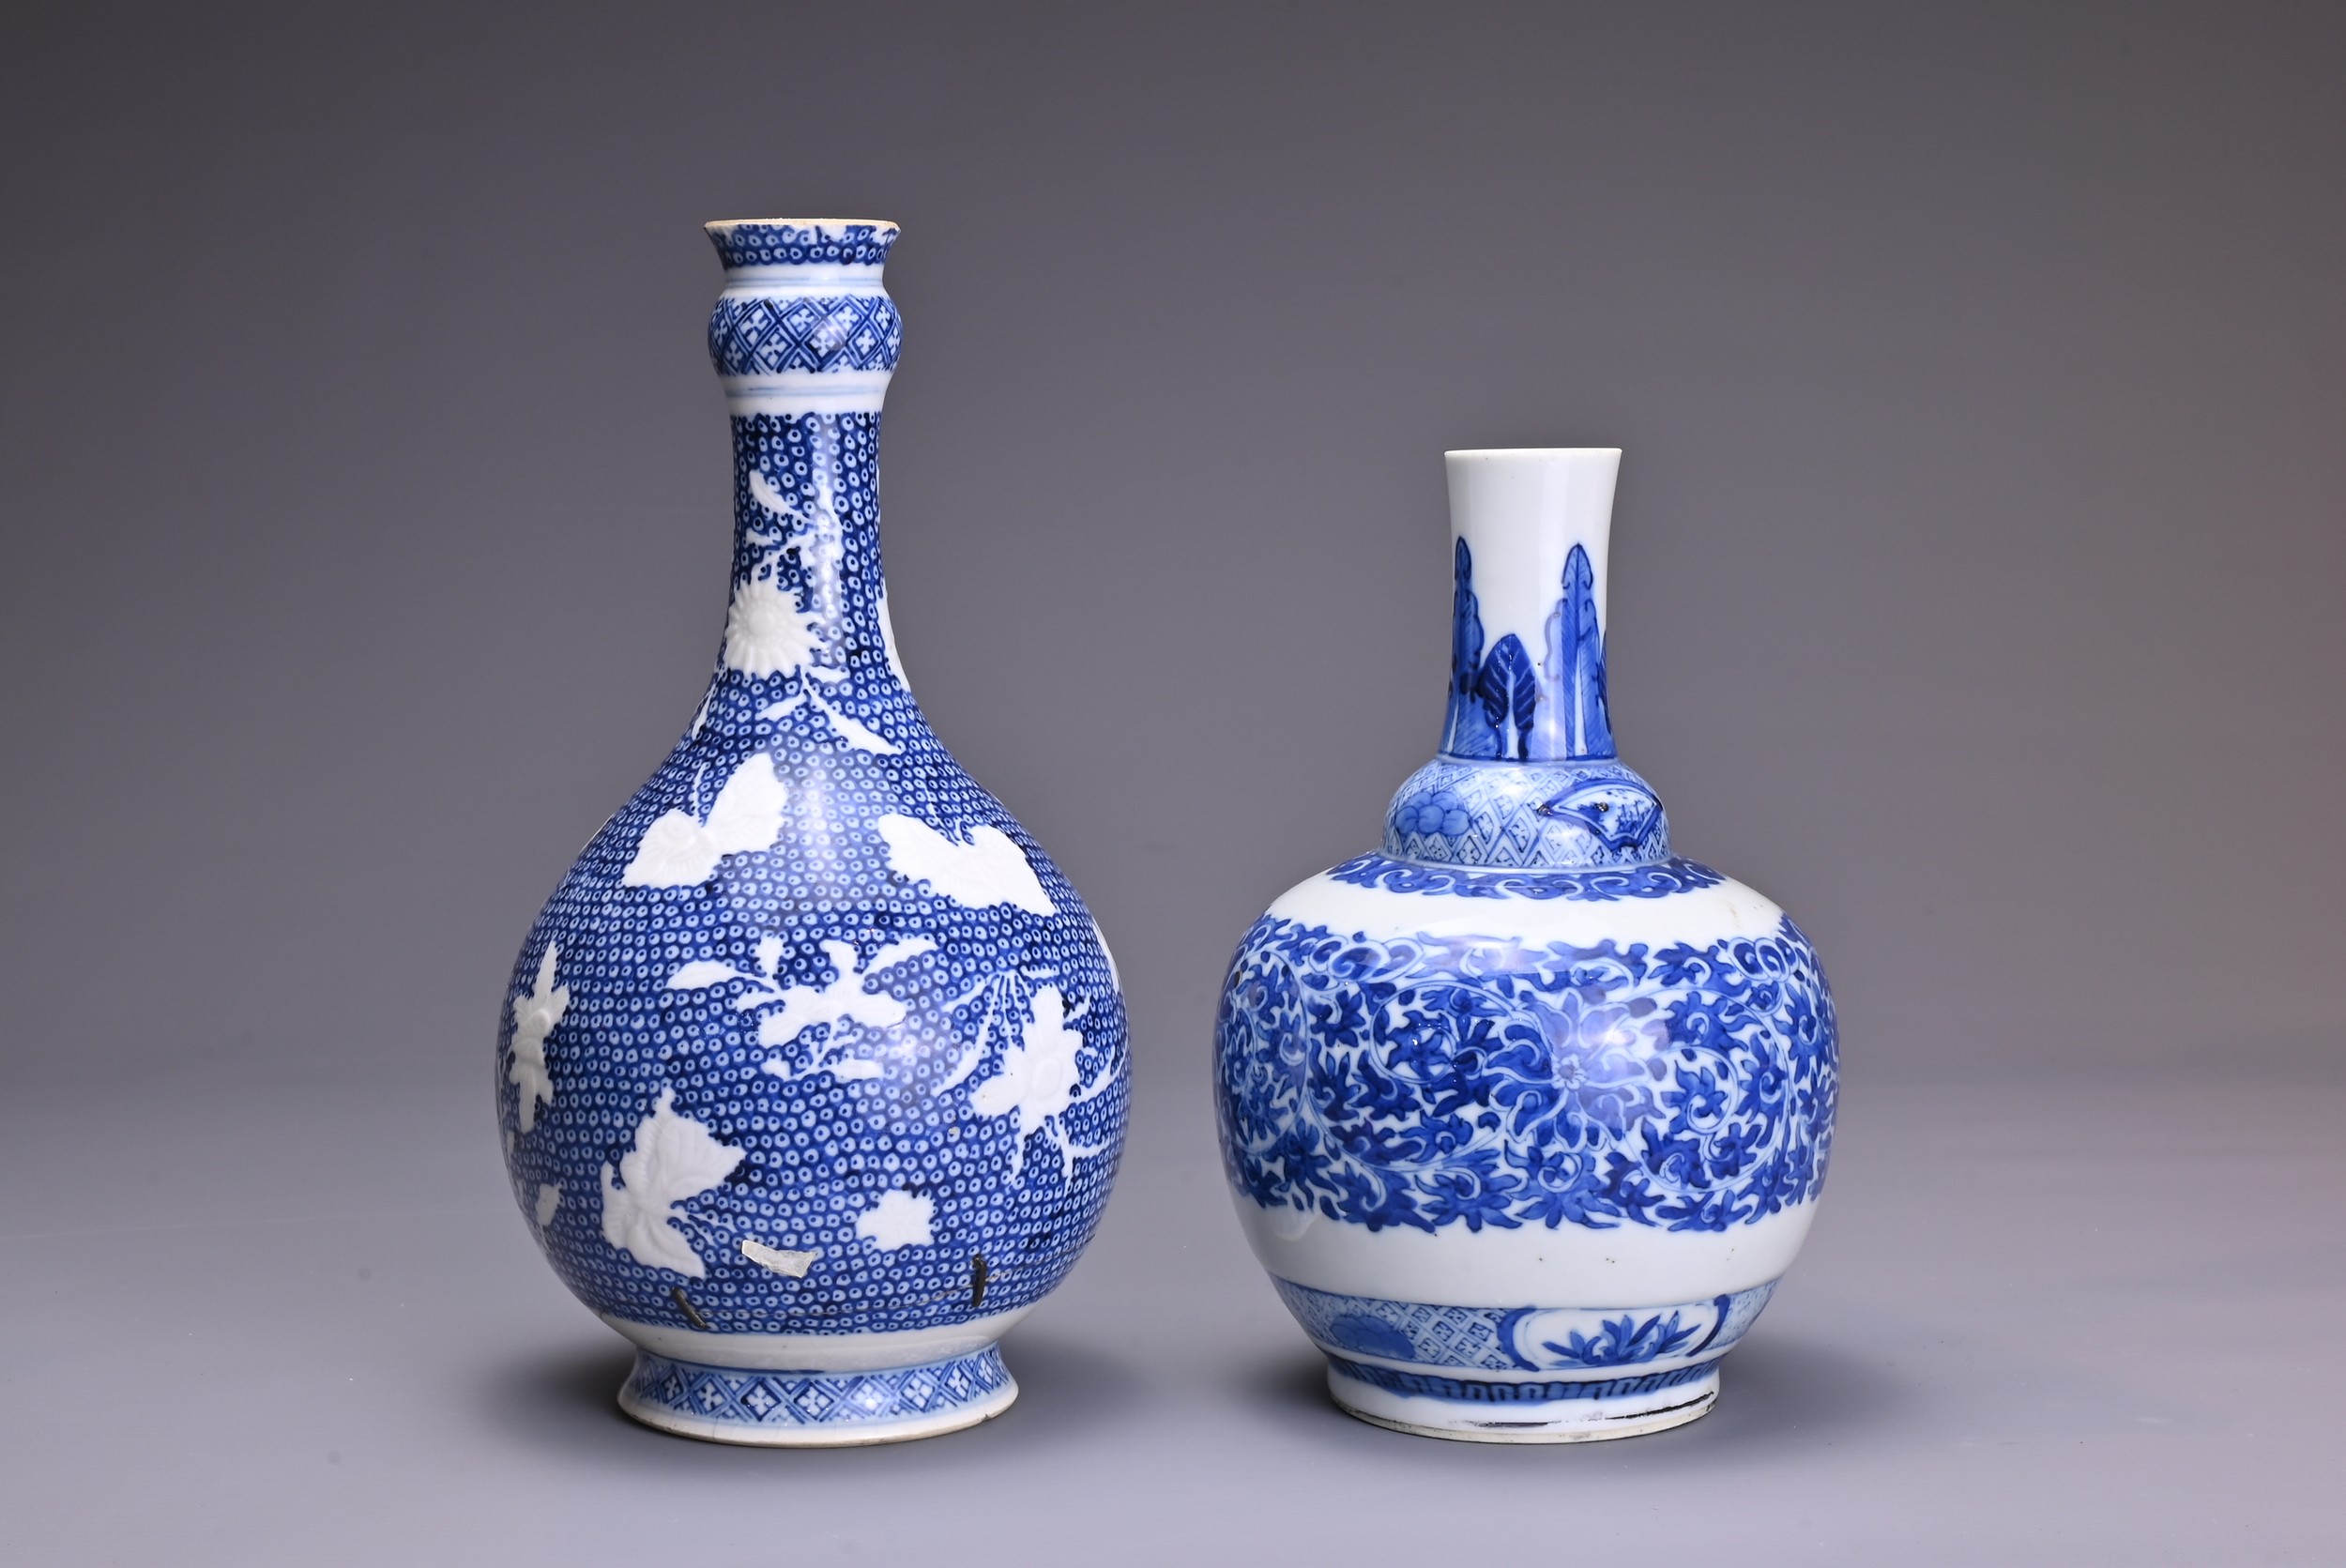 TWO CHINESE BLUE AND WHITE PORCELAIN VASES, 18/19TH CENTURY. An 18th century garlic-head bottle vase